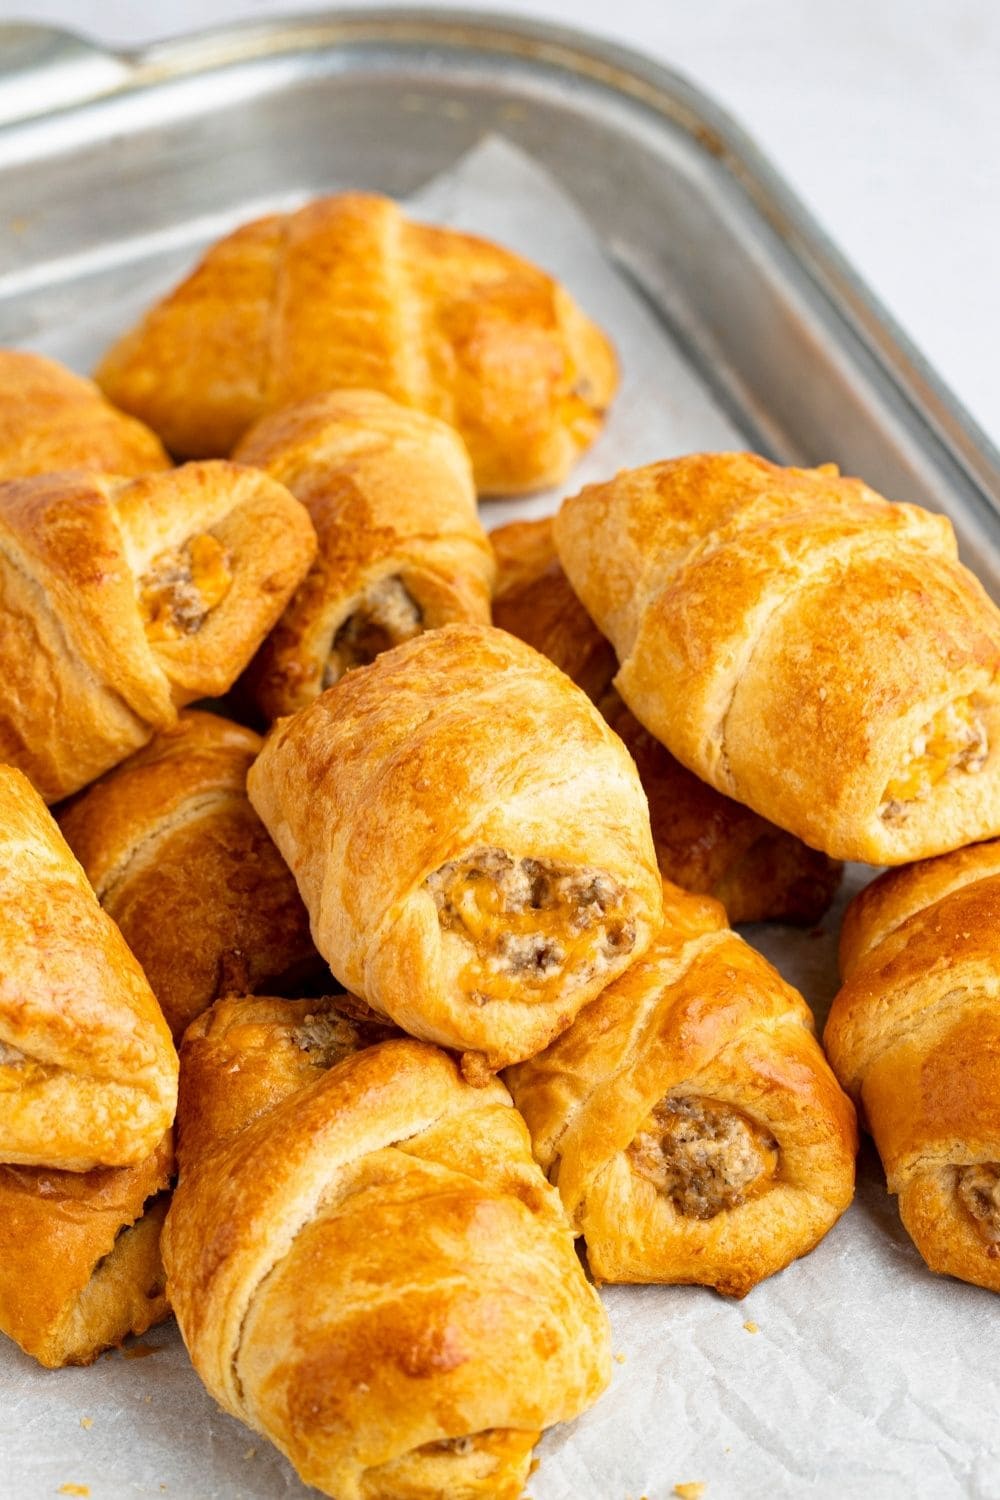 Sausage Cream Cheese Crescent Rolls in a Baking Sheet